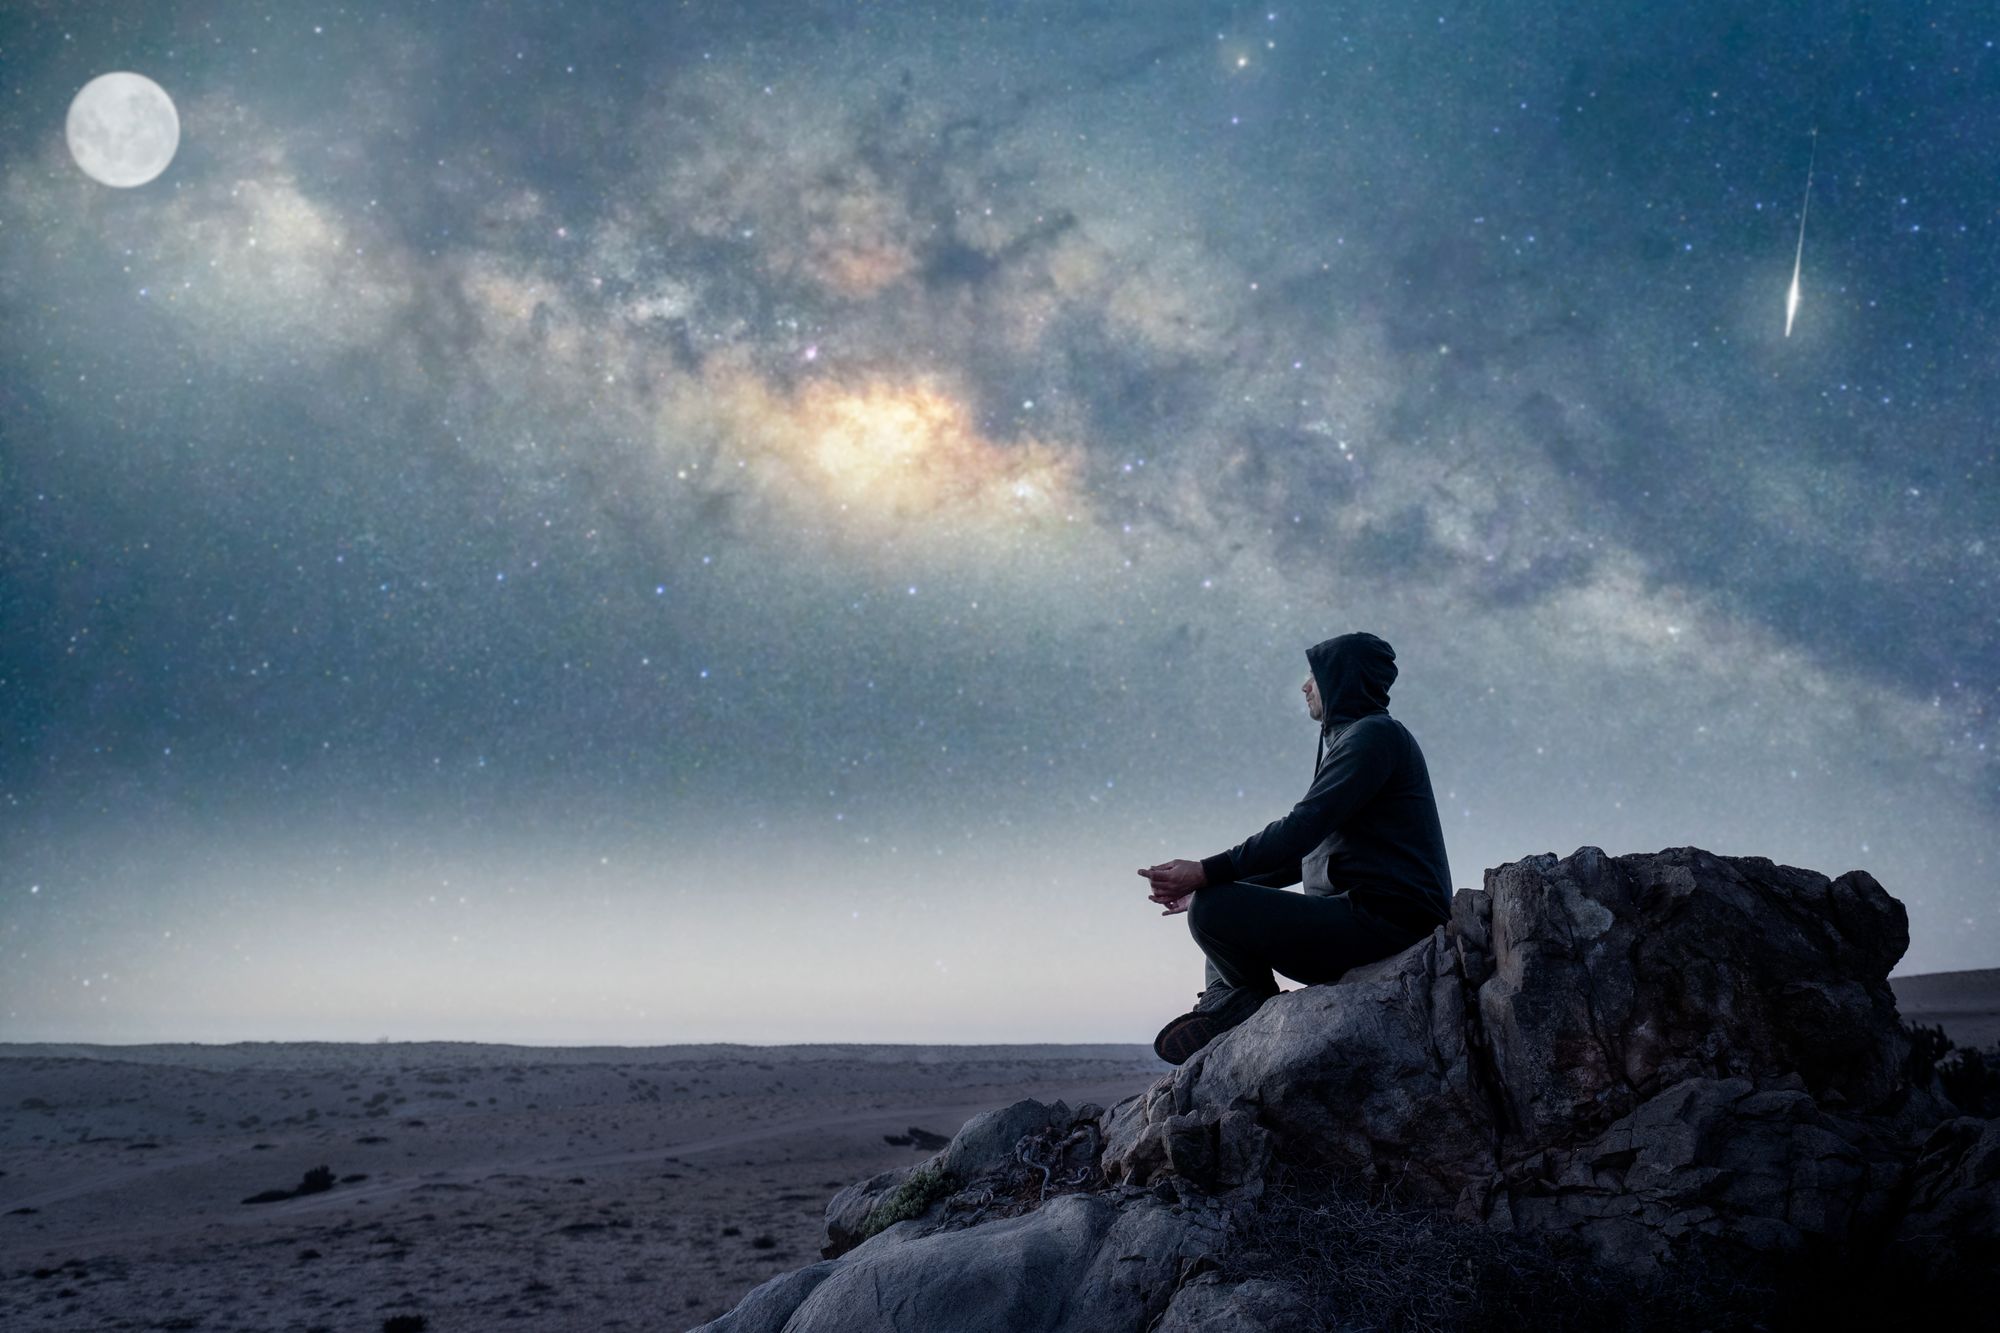 person-sitting-top-mountain-meditating-with-milky-way-moon-background.jpg